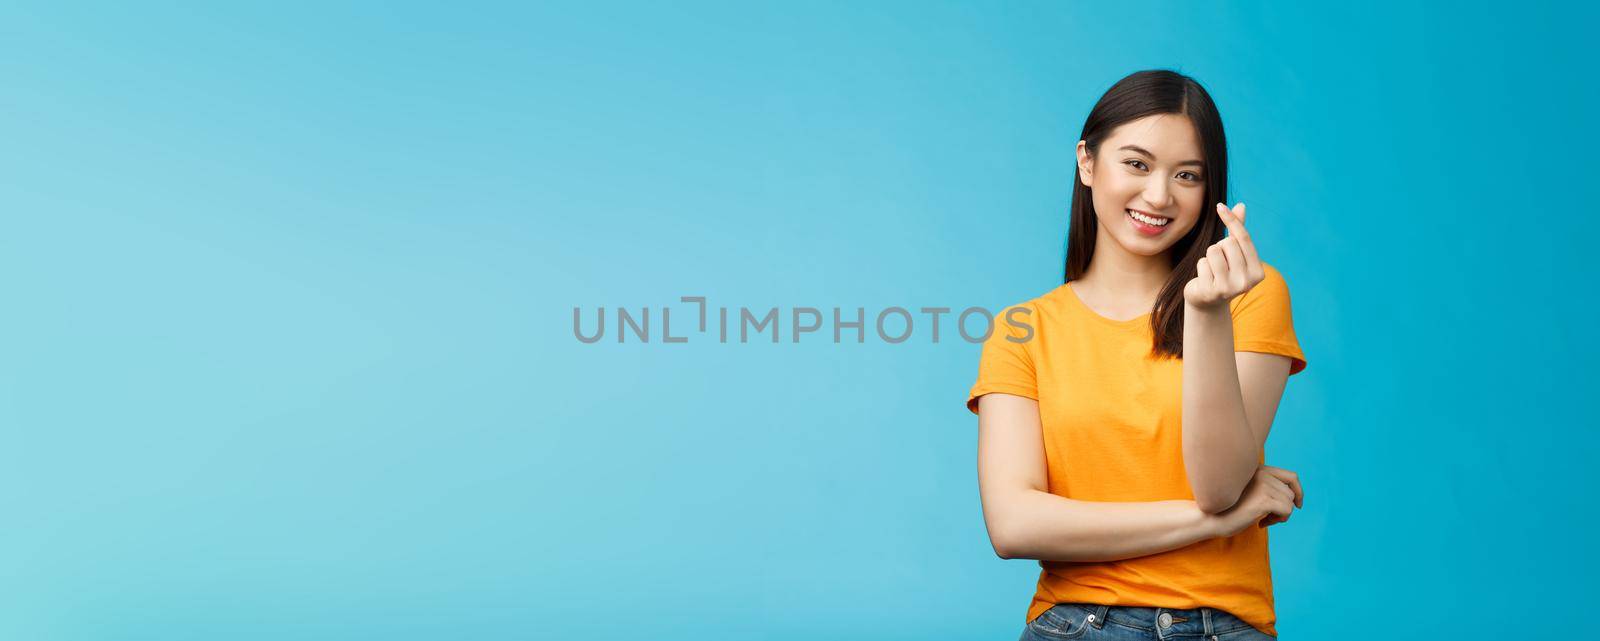 Cheerful cute asian woman dark short haircut, show korean heart sign with fingers, smiling joyfully, express sympathy and caring feelings, confess love stand blue background, grinning upbeat.